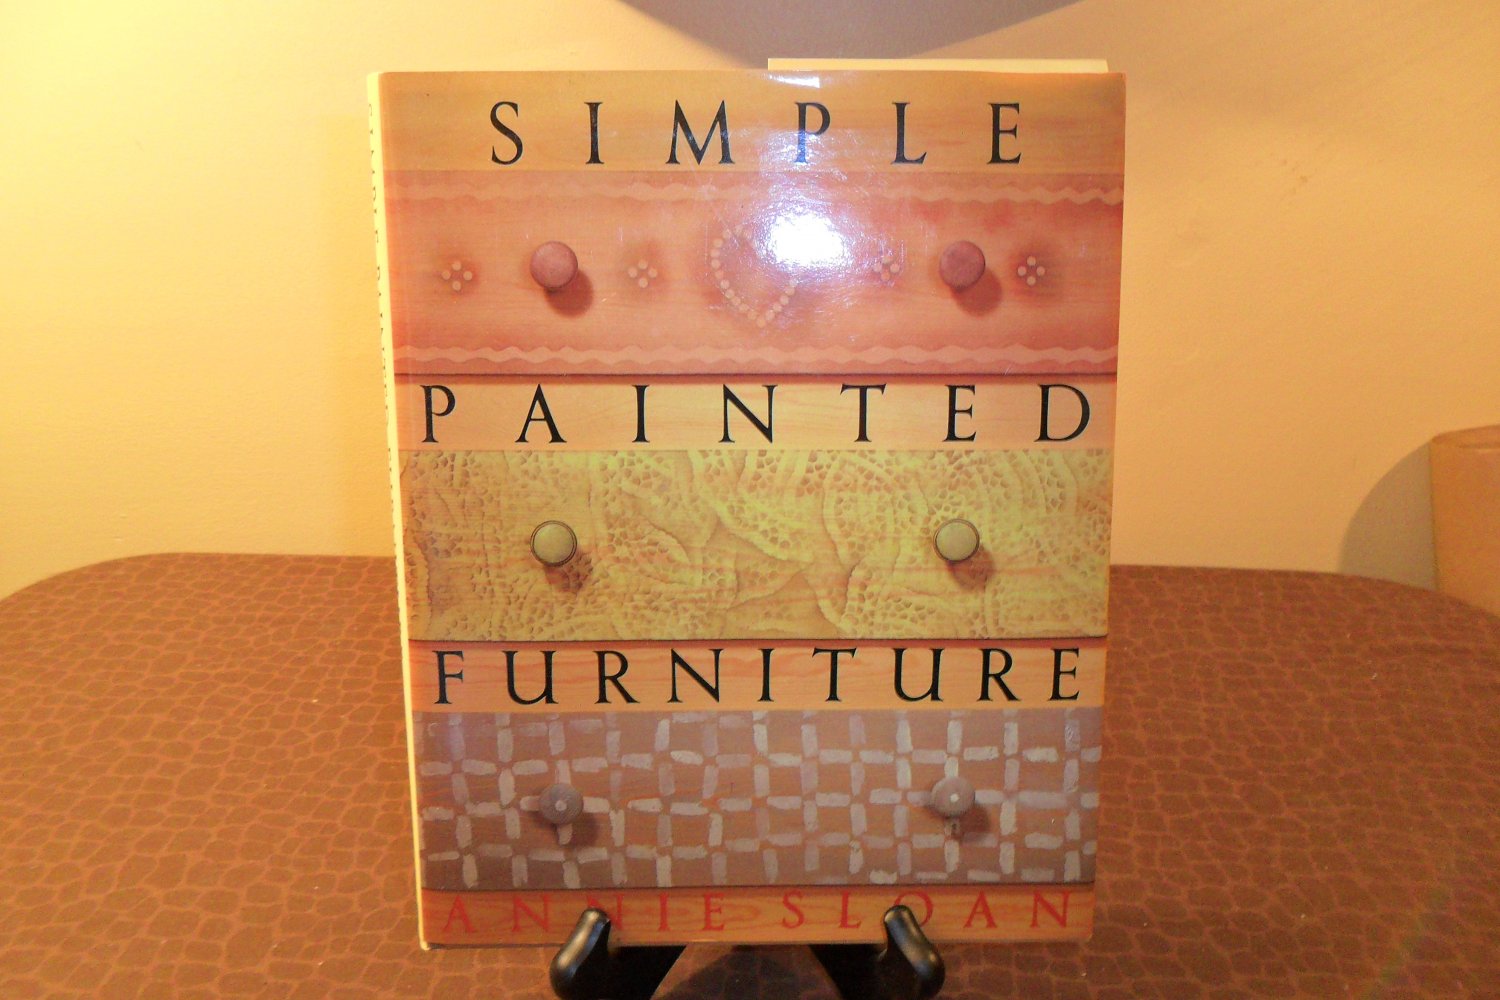 1989 Simple Painted Furniture Hrd Cover Book by Annie Sloan